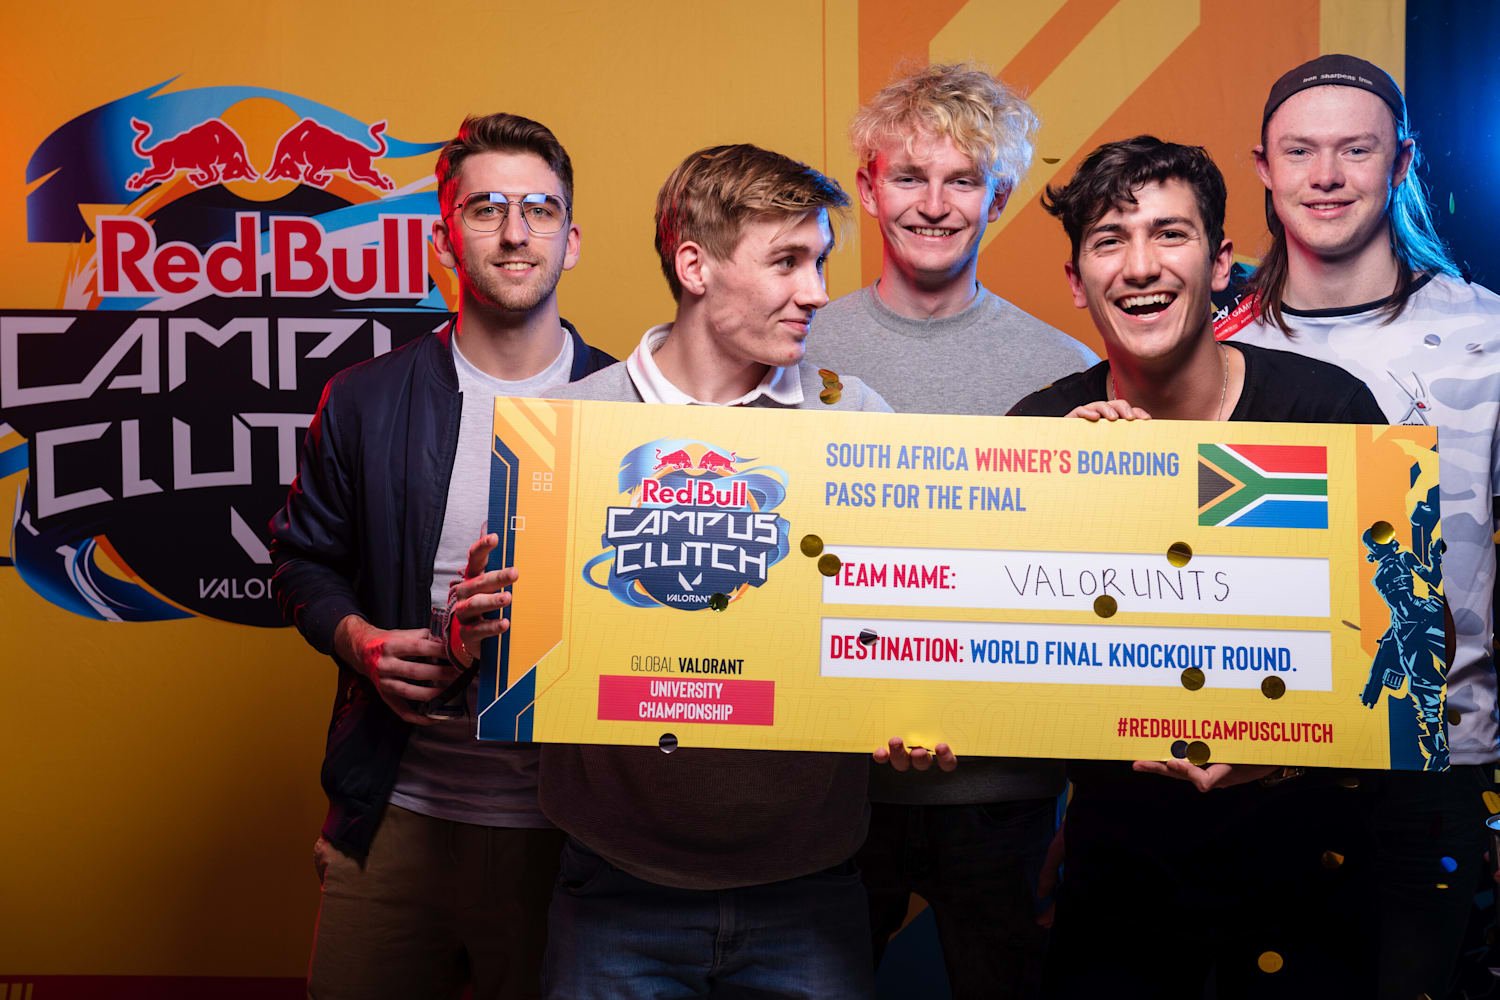 How Valorunts Won The Red Bull Campus Clutch South African Final Flipboard